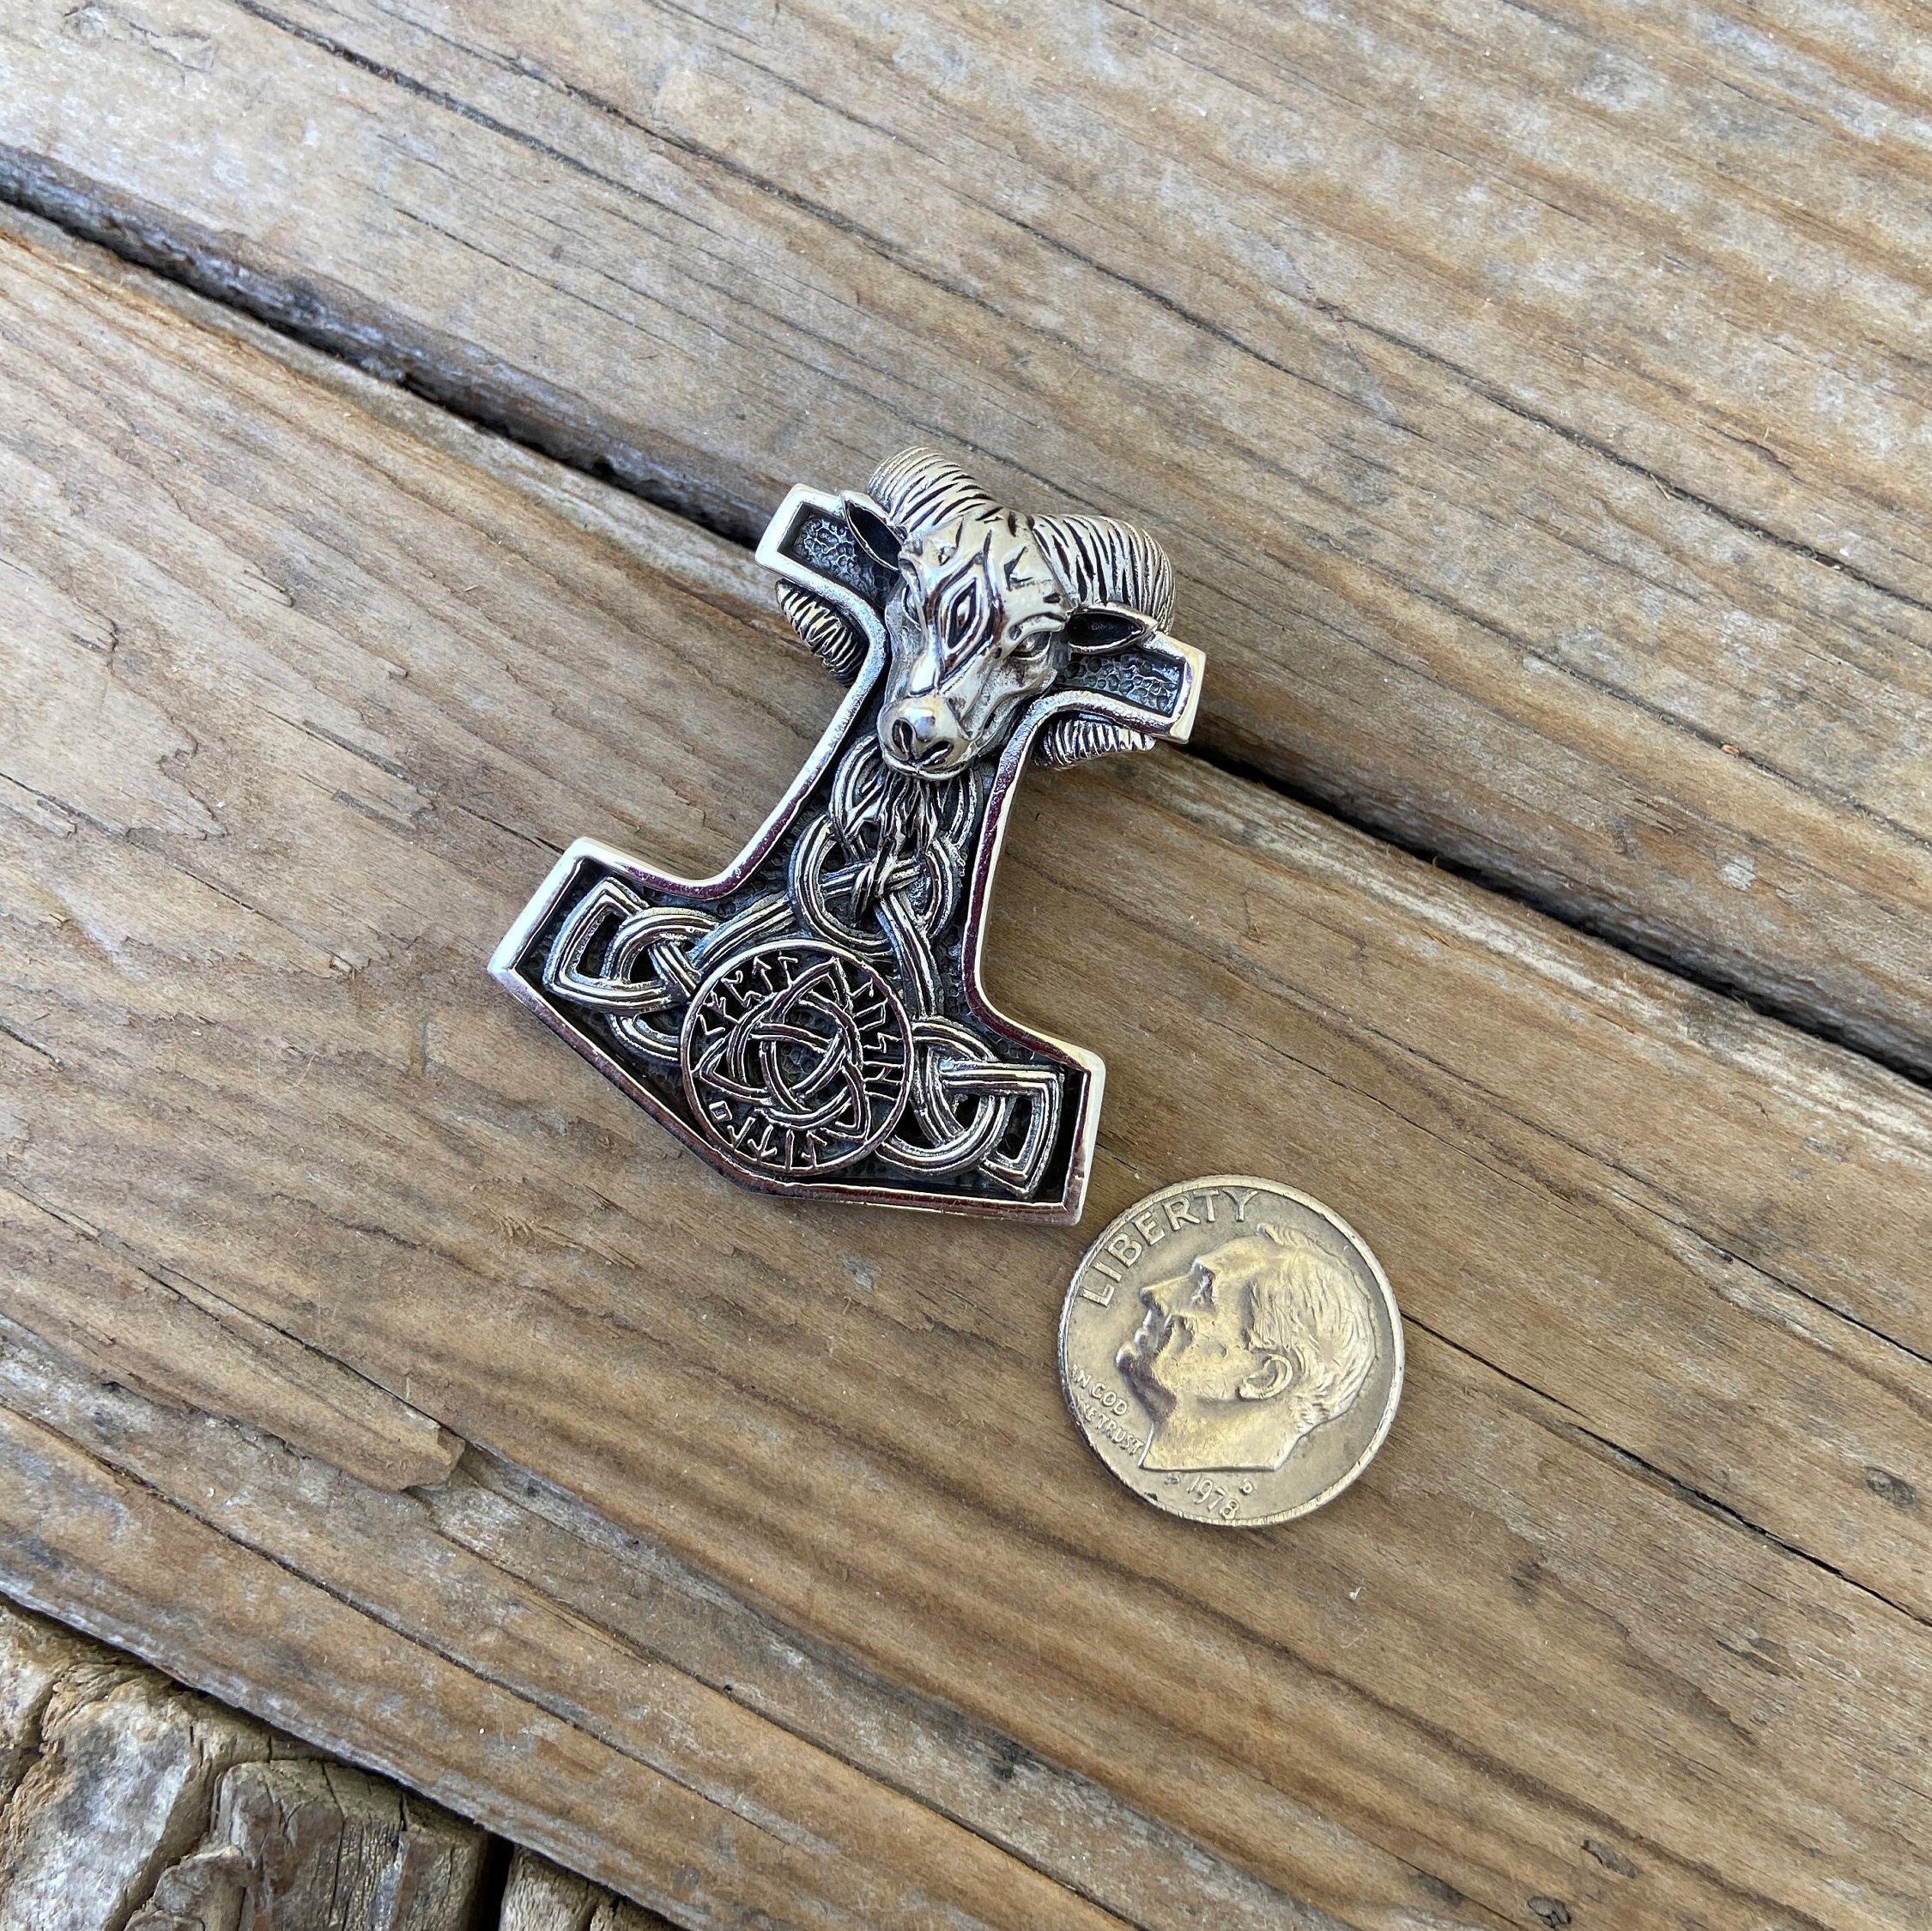 On Sale Hammer Of Thor Pendant With A Rams Head Triquetra, Handmade in Sterling Silver 925